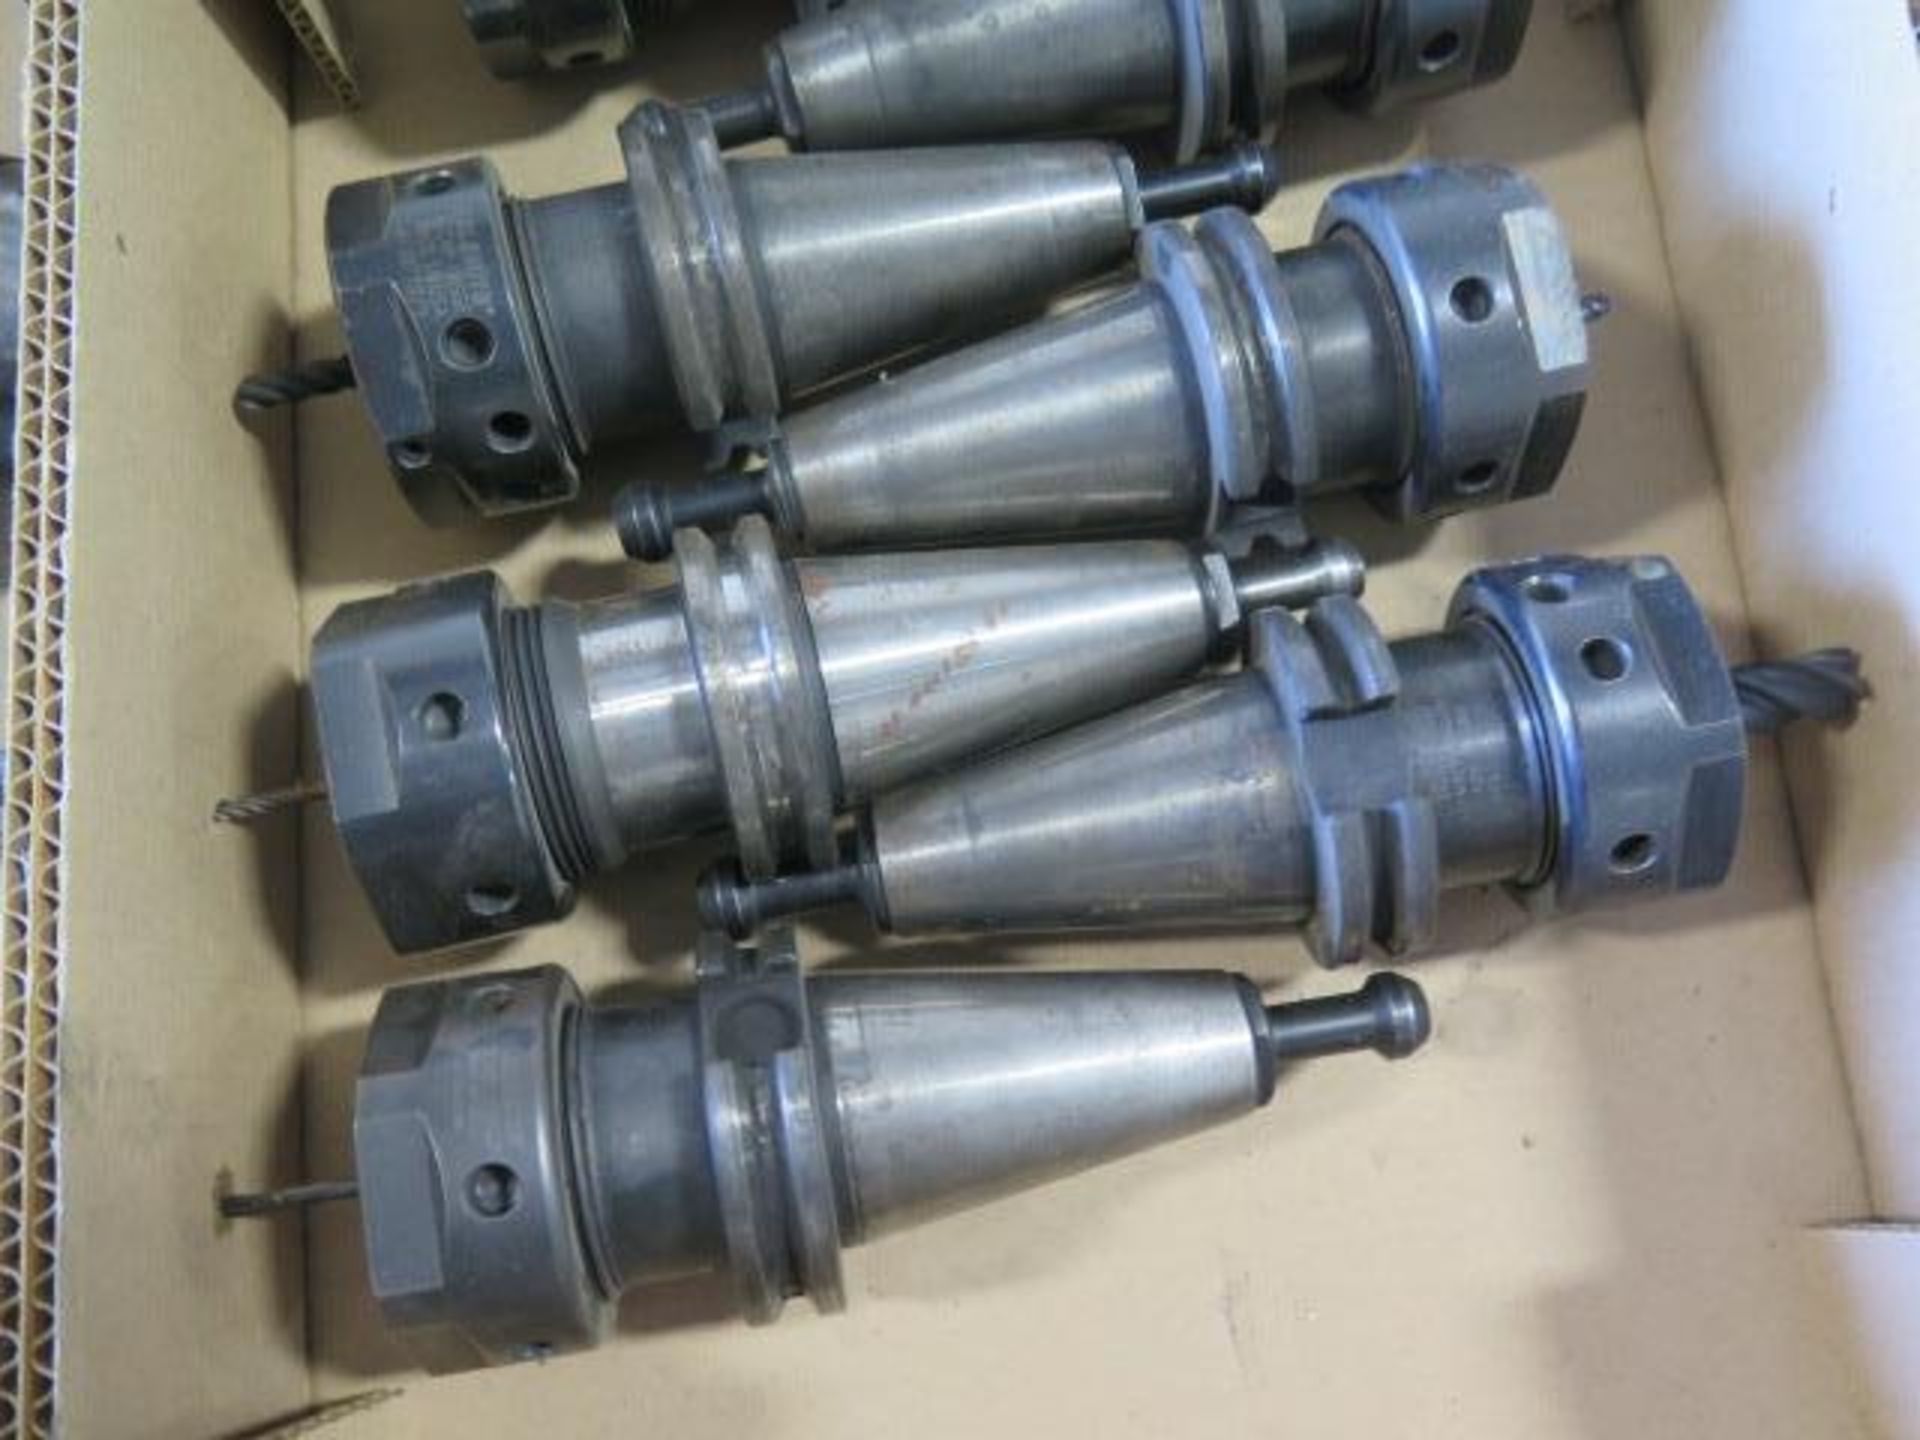 CAT-40 Taper TG-100 Collet Chucks (7) (SOLD AS-IS - NO WARRANTY) - Image 4 of 4